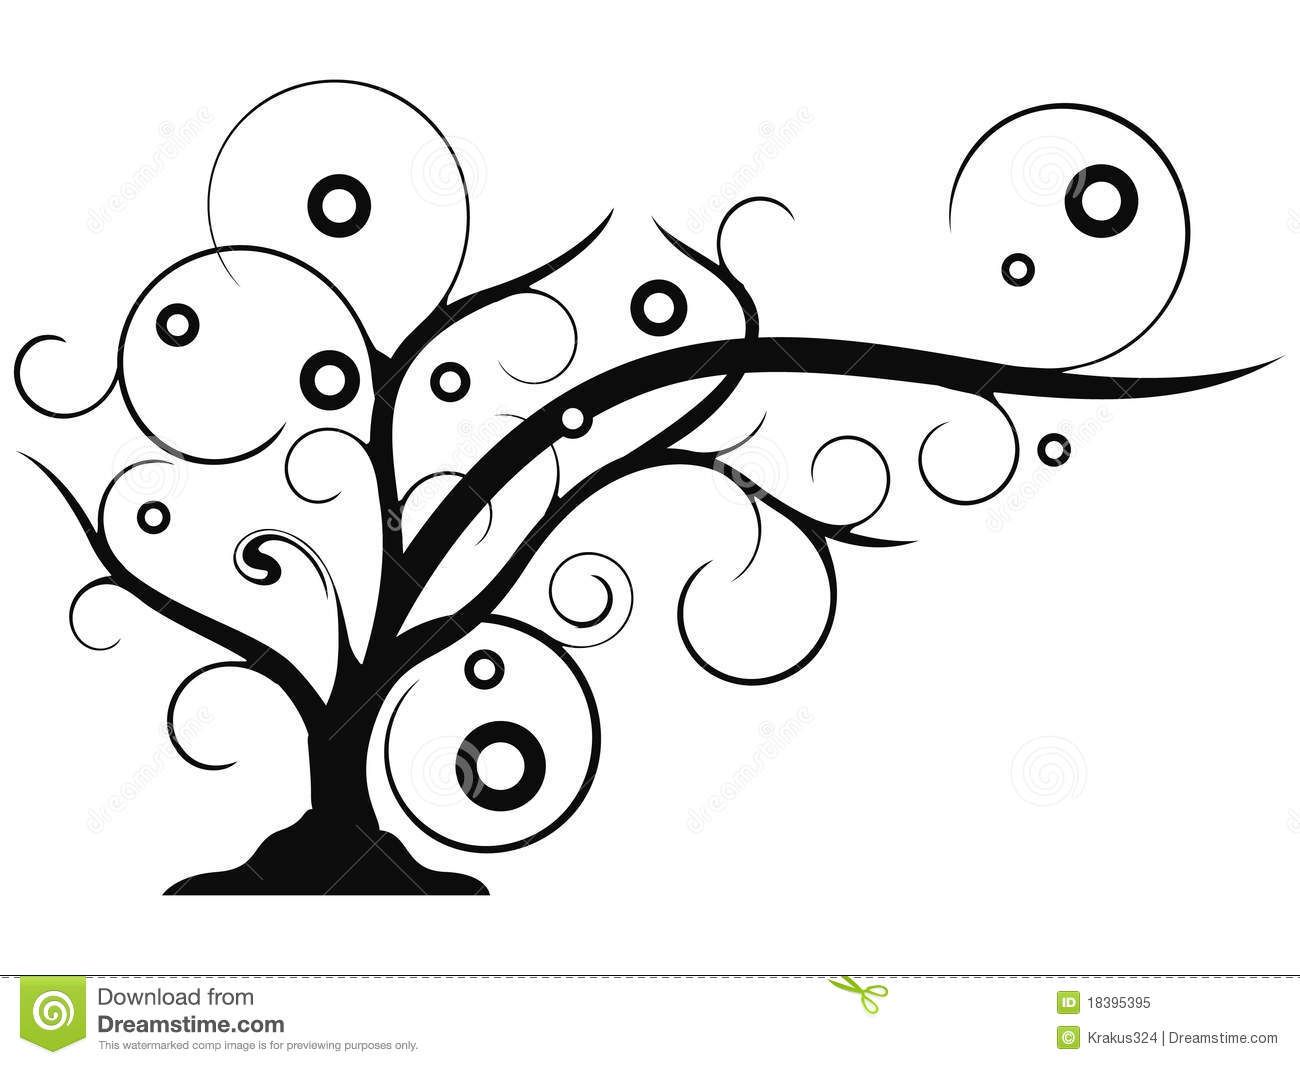 tree clipart abstract